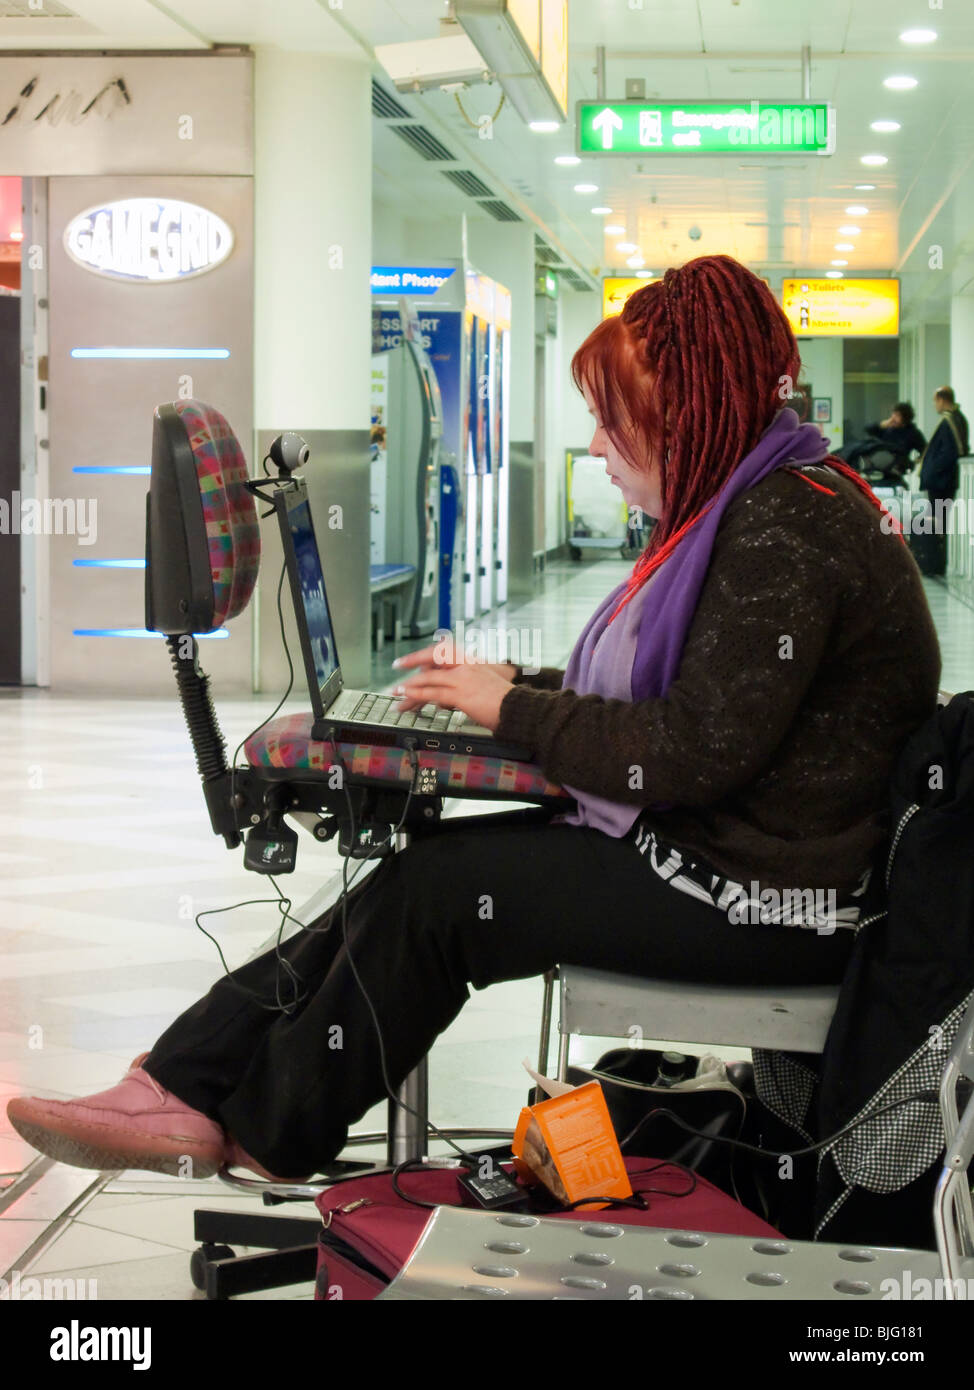 A female airline passenger using a laptop computer in an airport transit area with waiting passengers in the background. Stock Photo